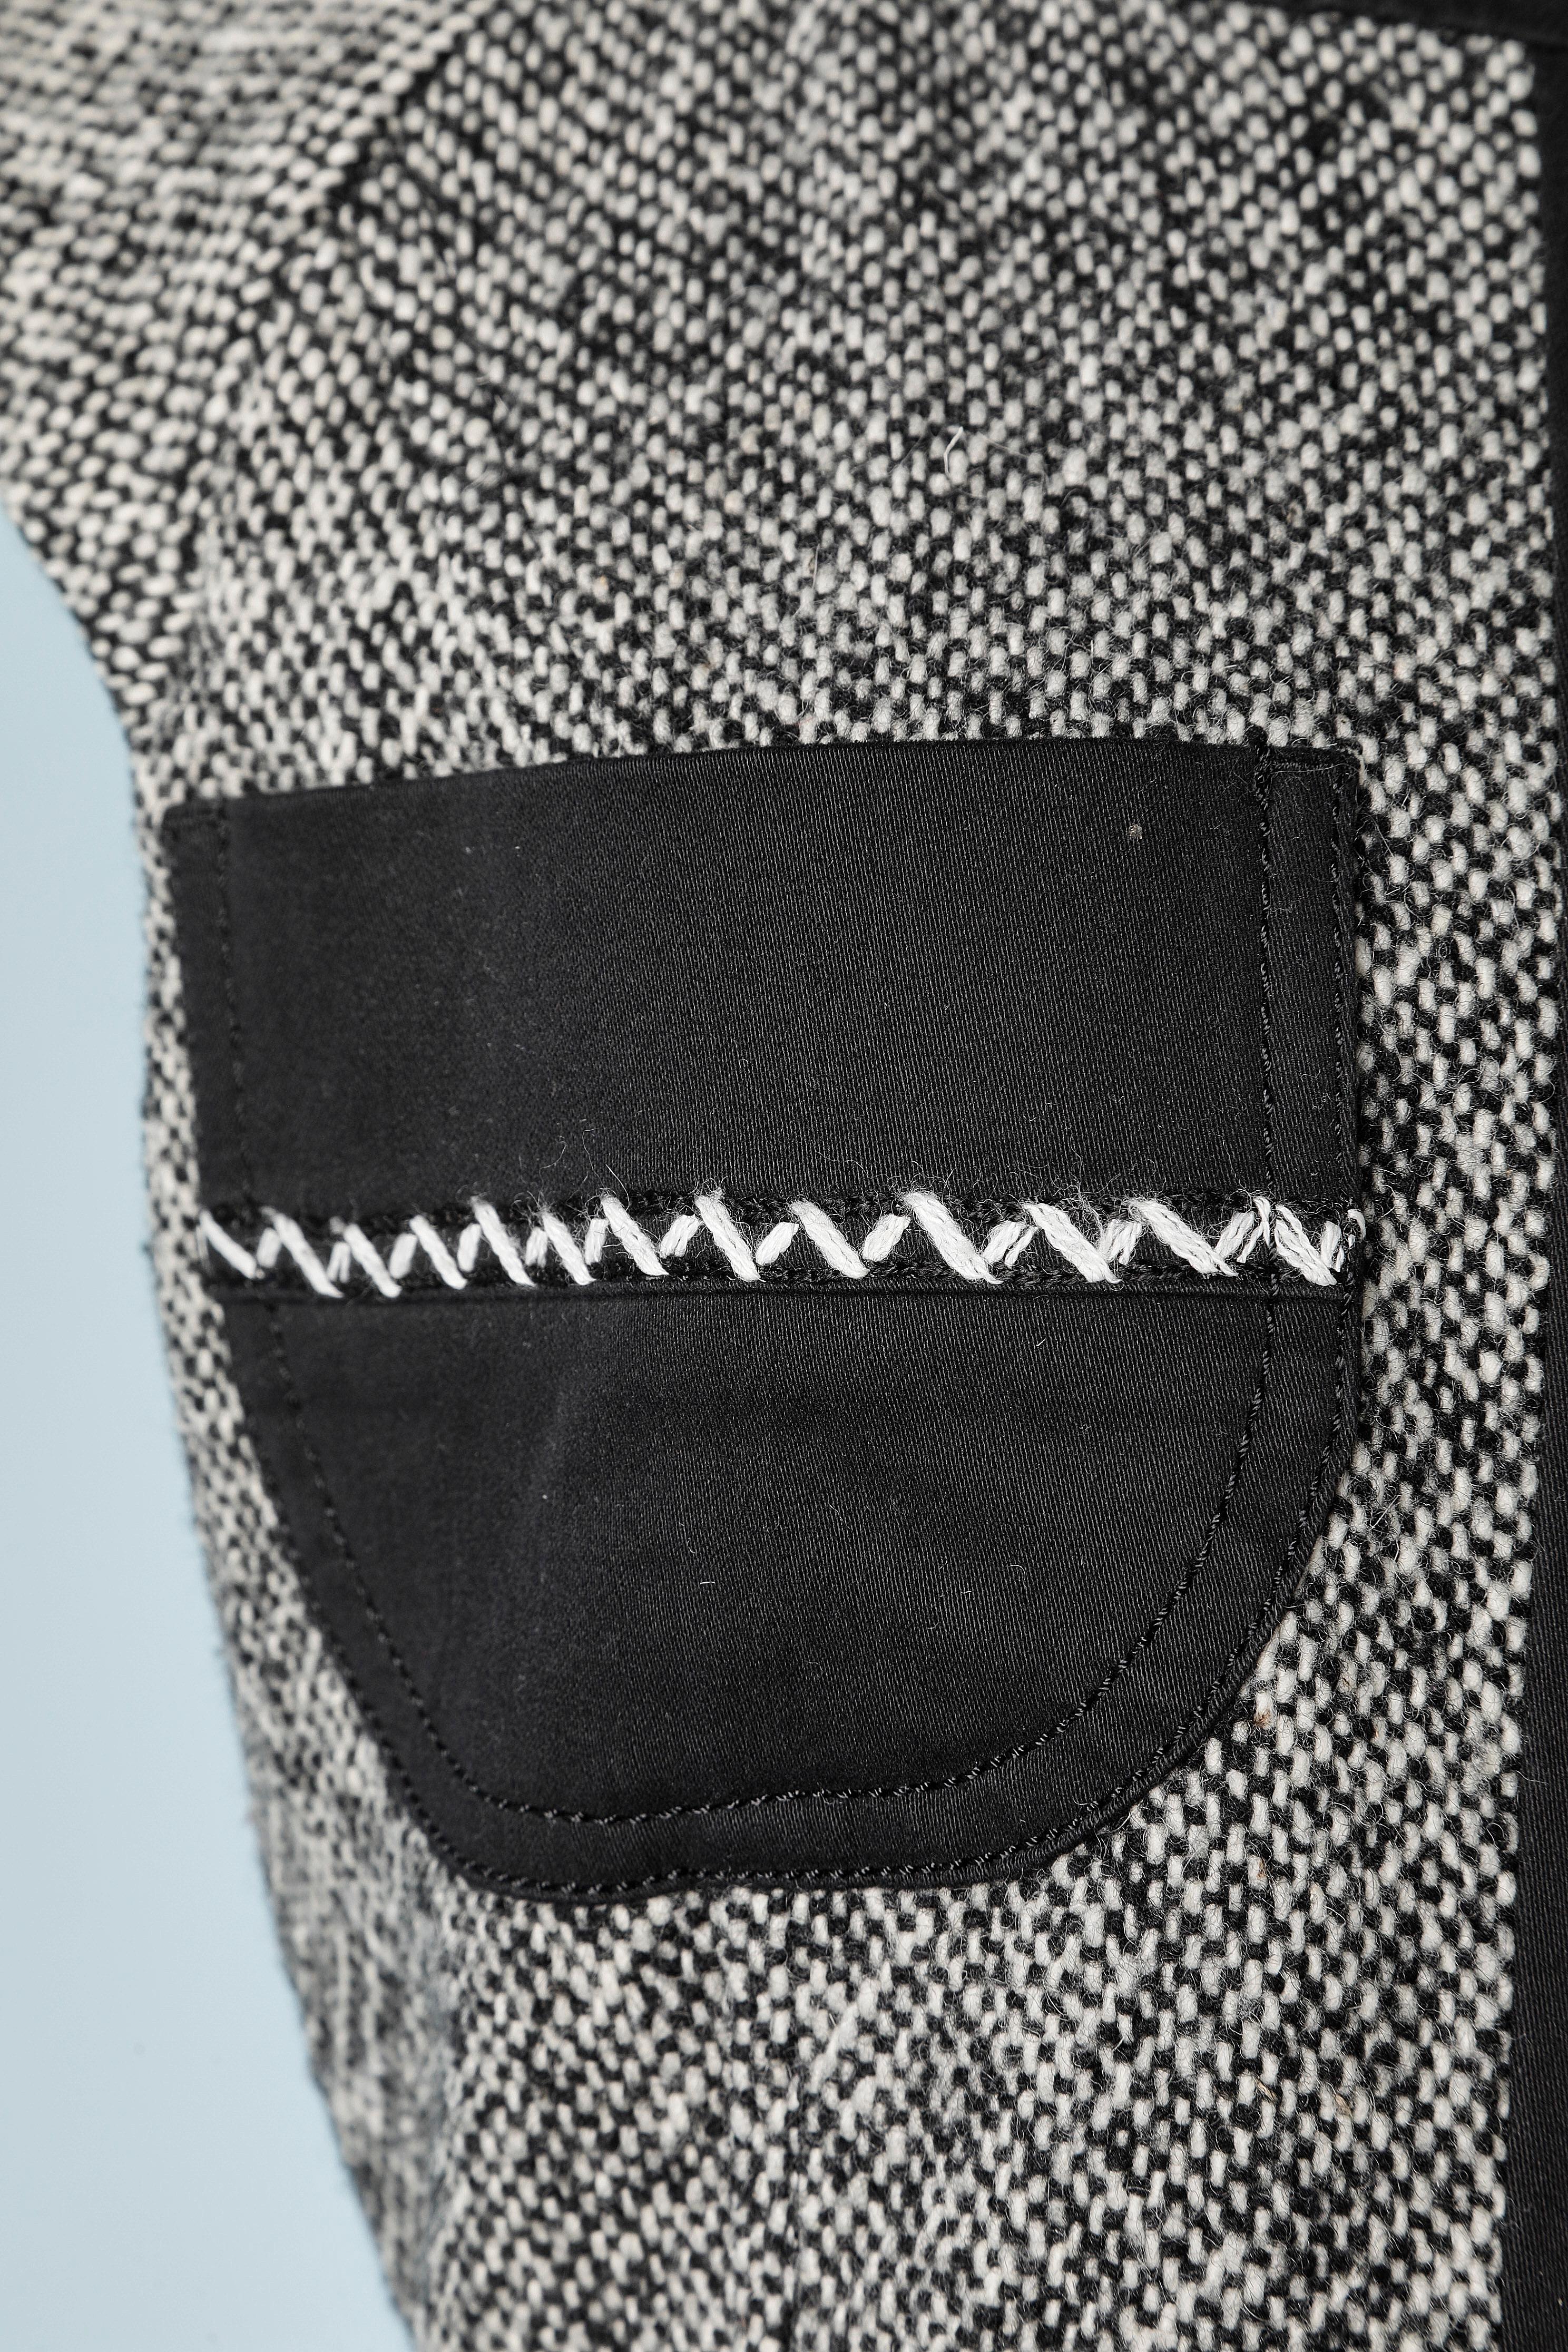 Sleeveless black and white tweed dress with black cotton pockets and waistband. 
Top -stitched.